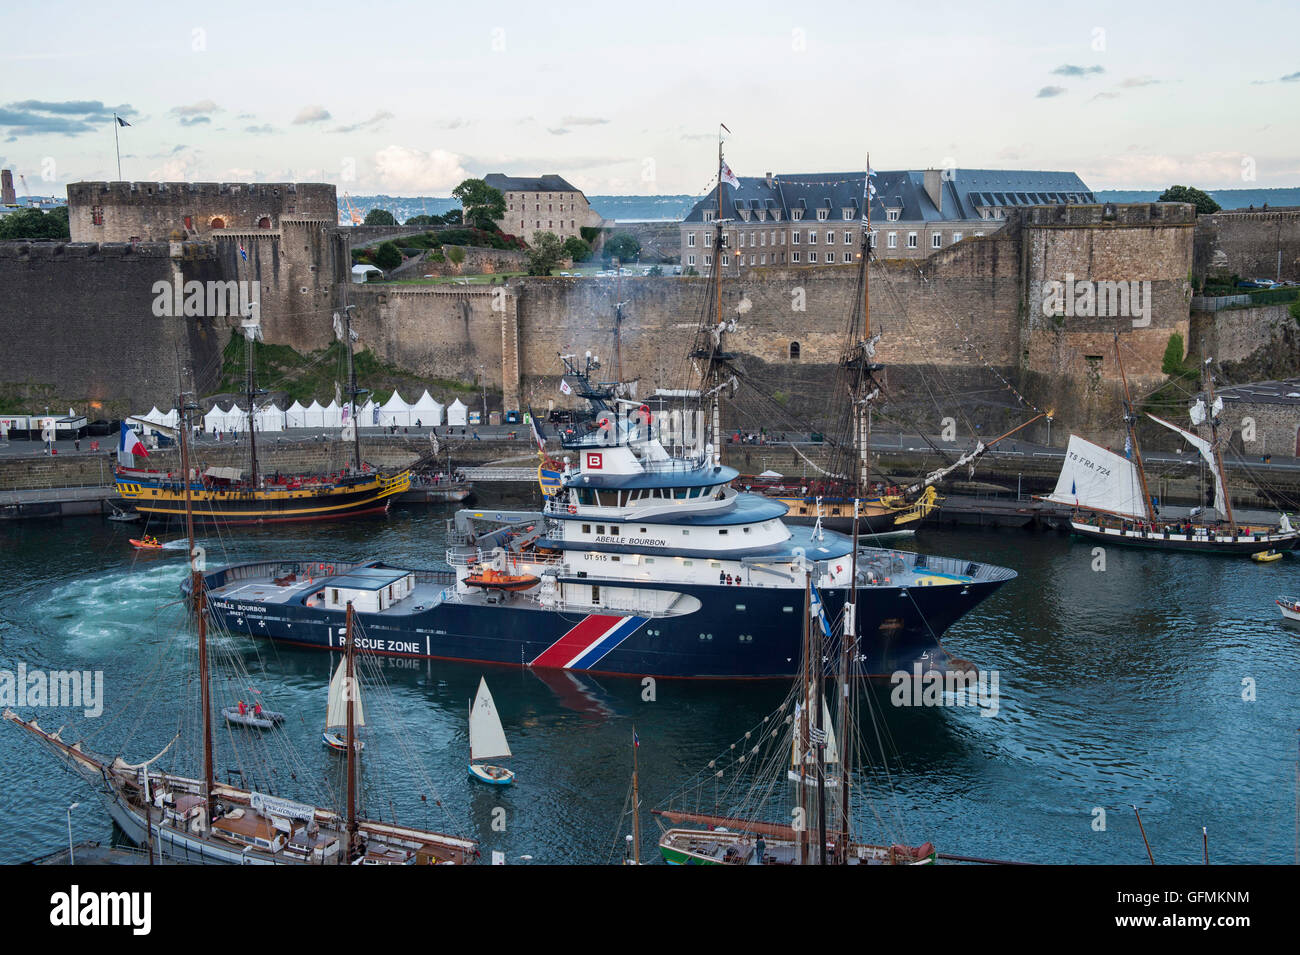 The Abeille Bourbon, a french rescue boat, doing a night parade,  in the port of Brest, western France, on July 13, 2016, on the first day of the Brest 2016 Maritime feast. Stock Photo